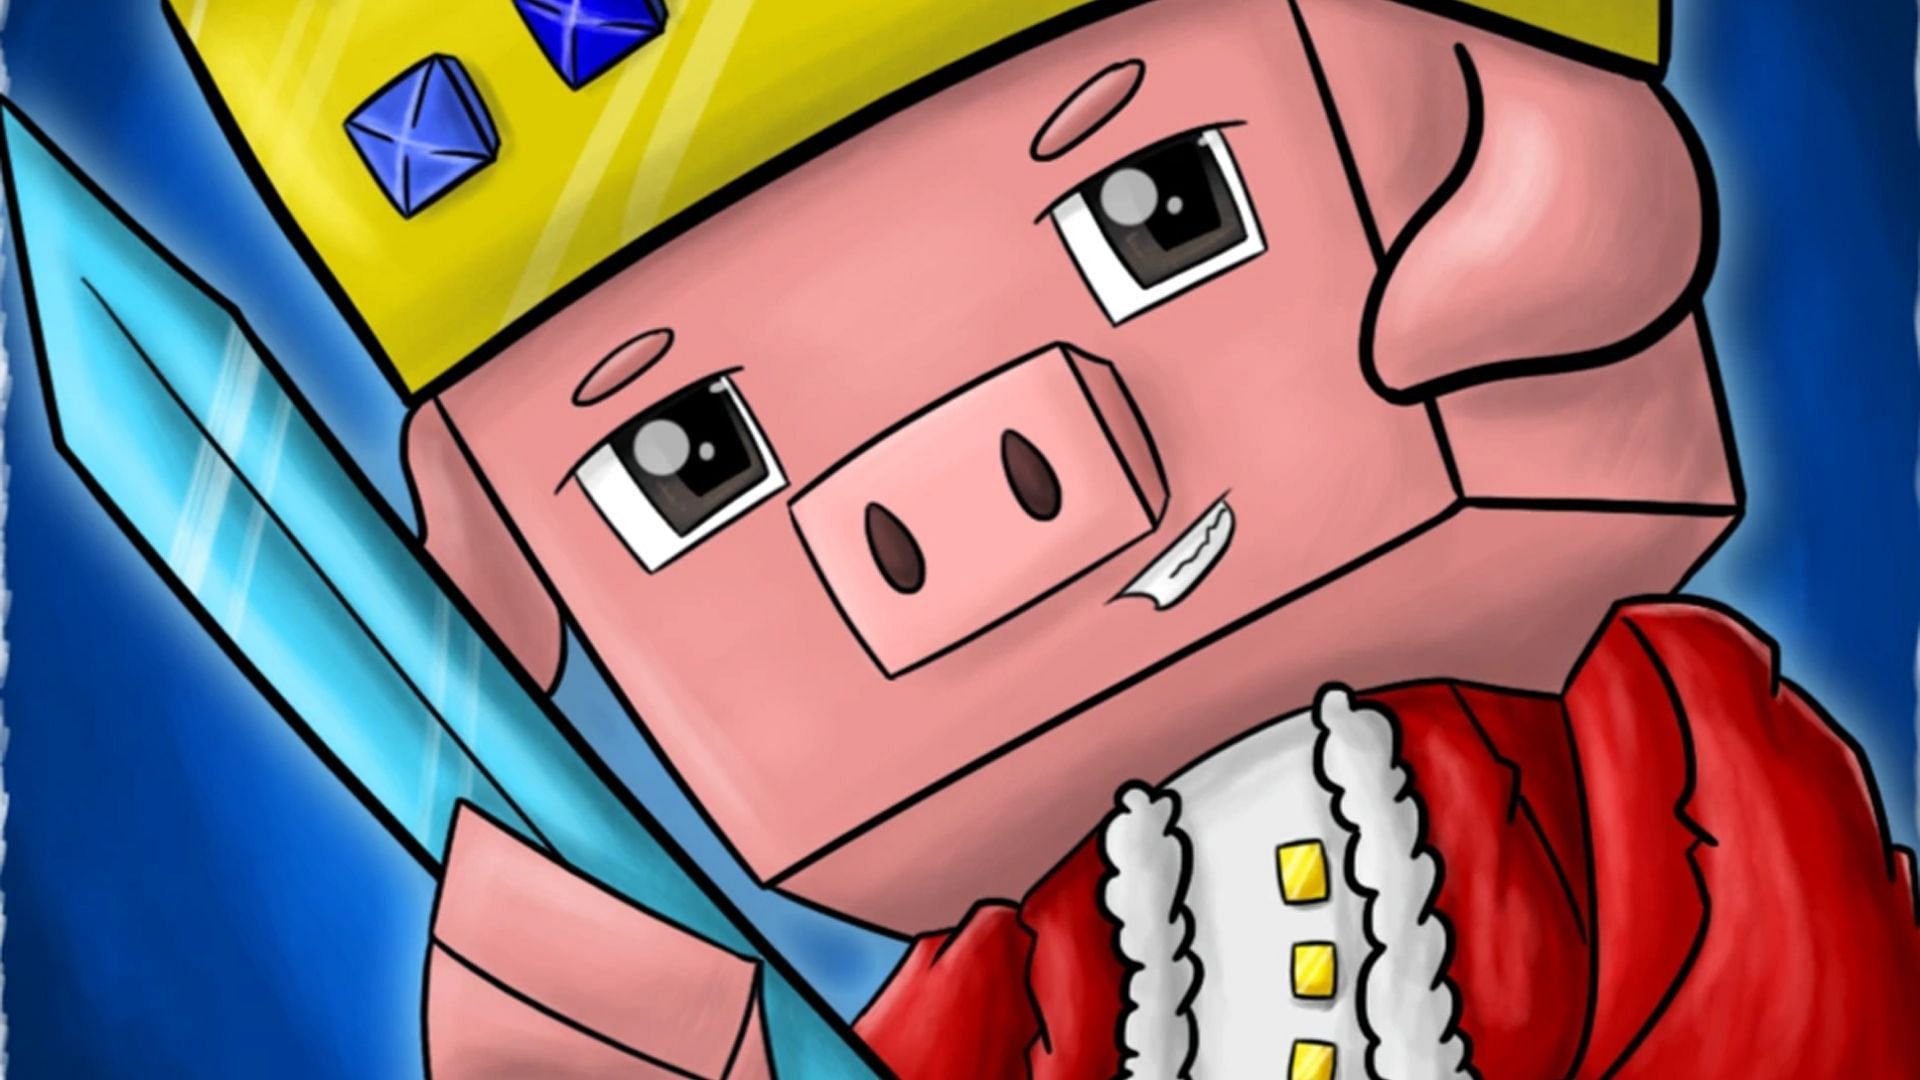 Technoblade is one of the most fearsome players when it comes to Minecraft (Image via Technoblade/YouTube)